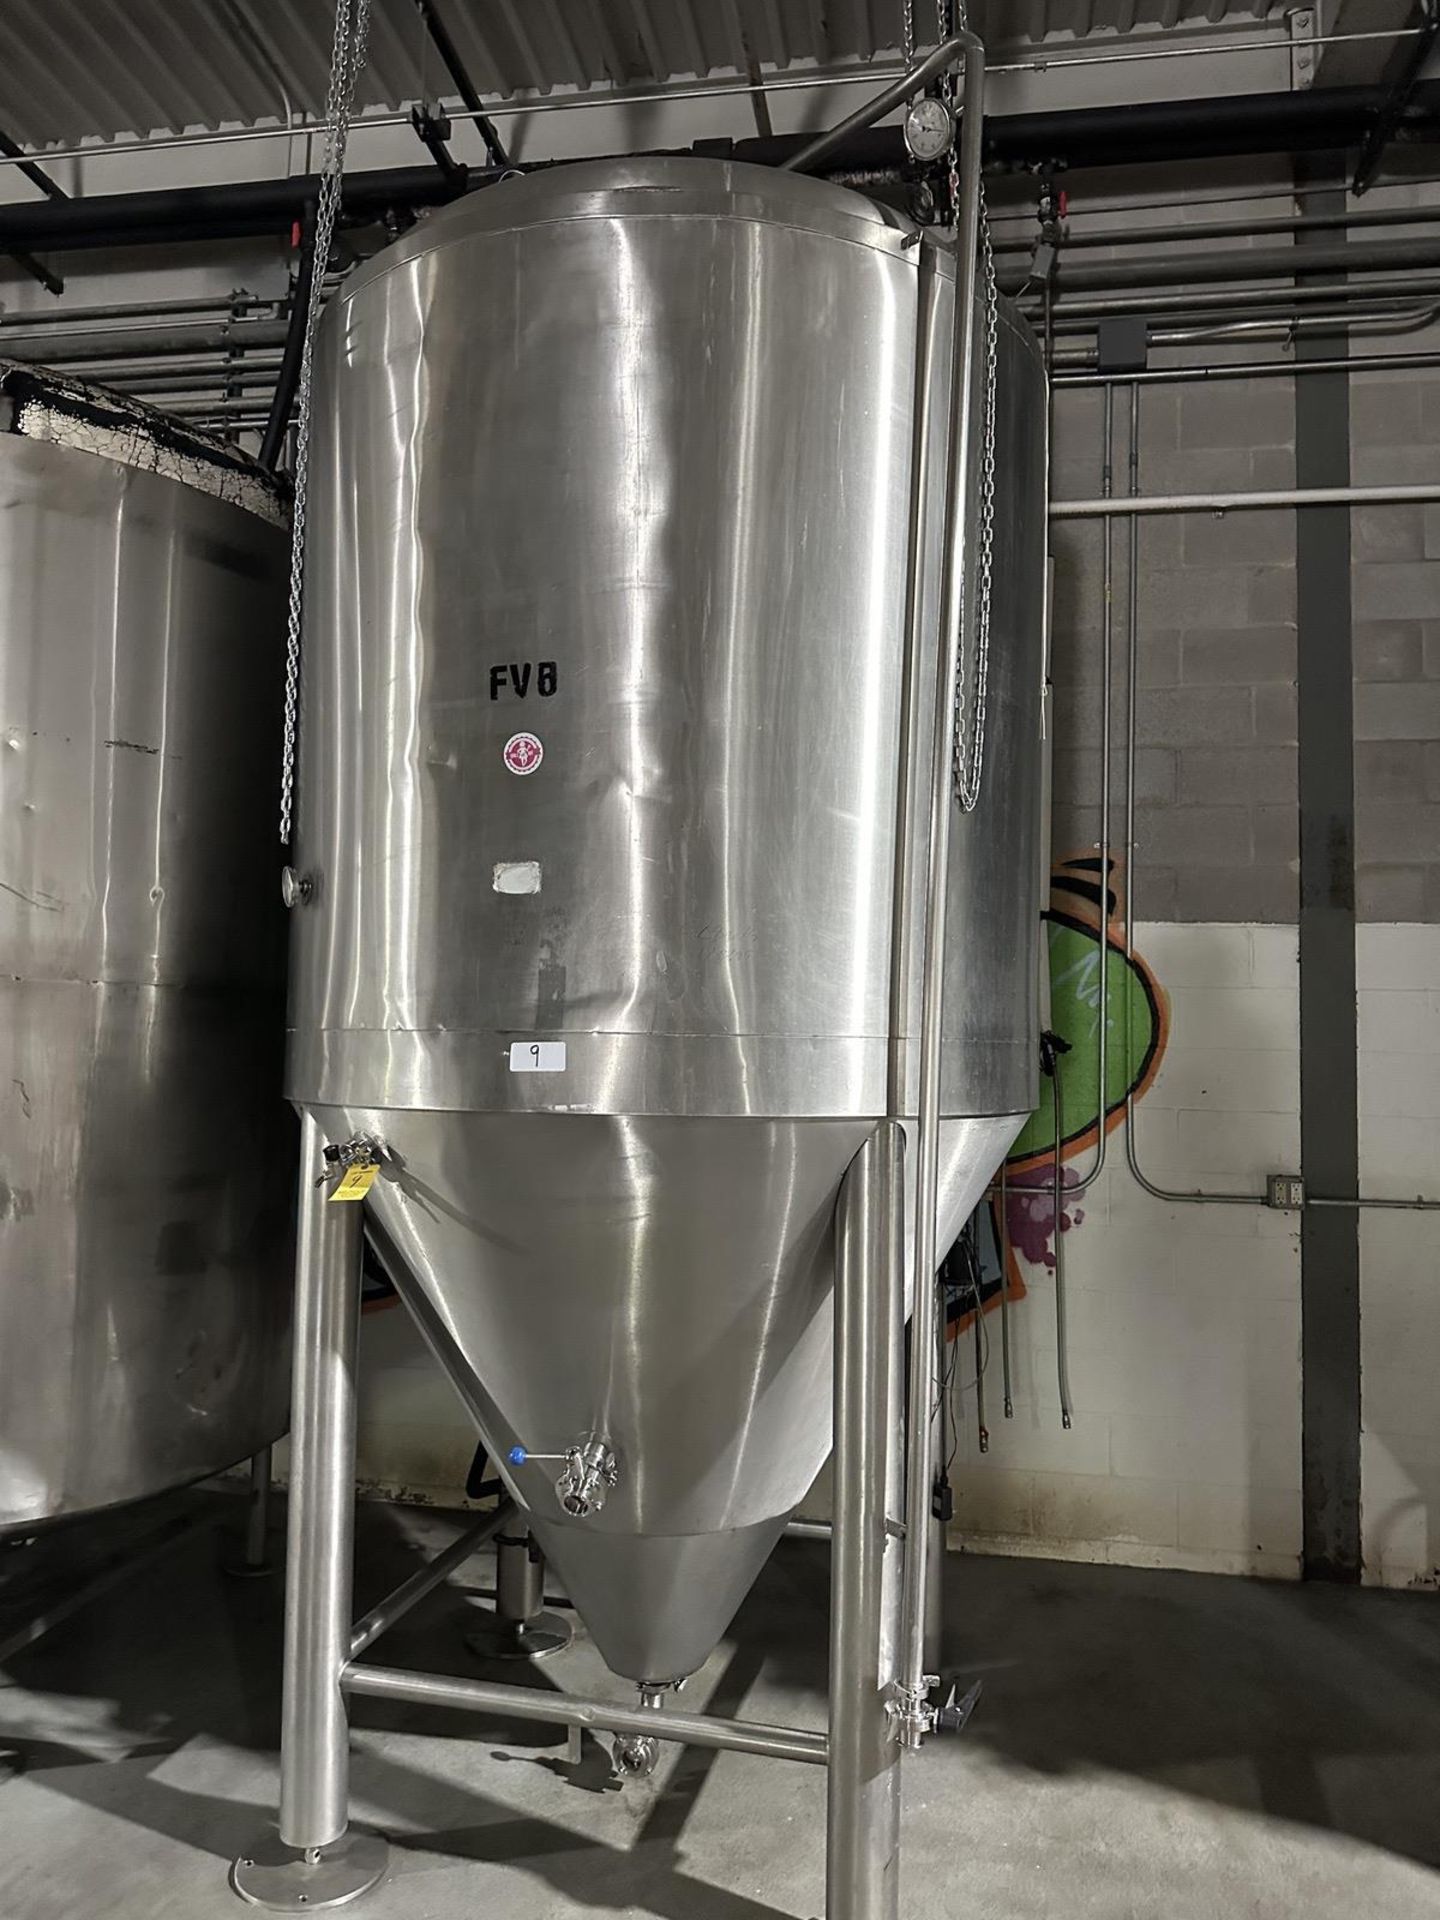 Approx. 30 BBL Stainless Steel Fermenter, Glycol Jacketed - Image 3 of 3